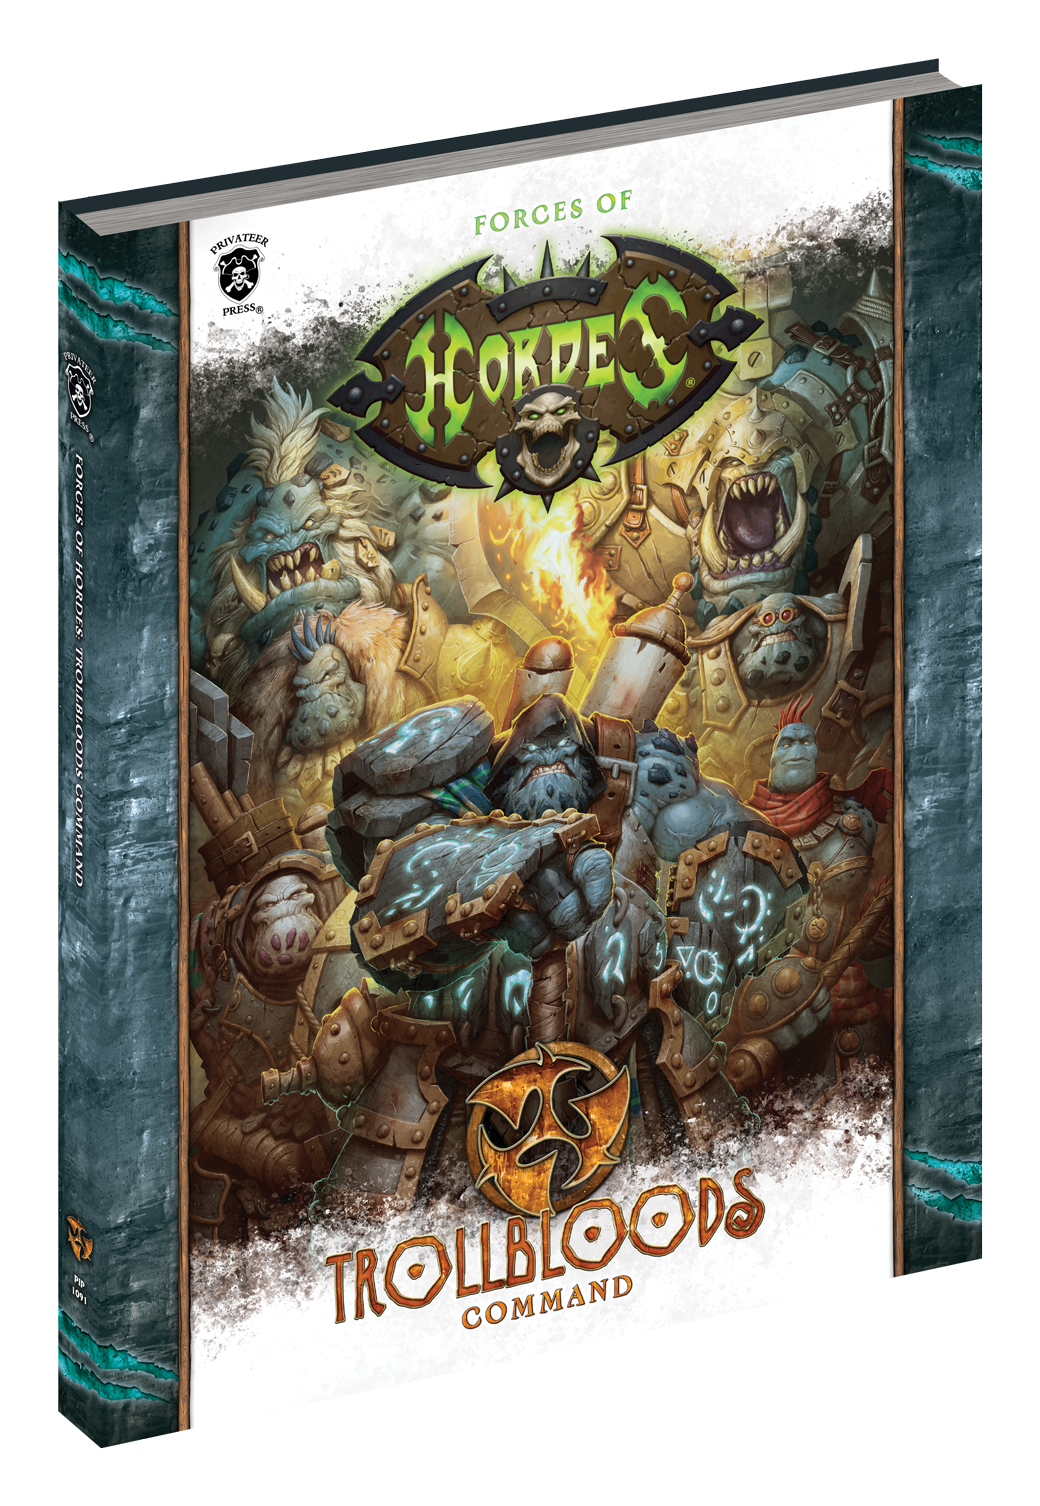 Forces of Trollbloods - Softcover